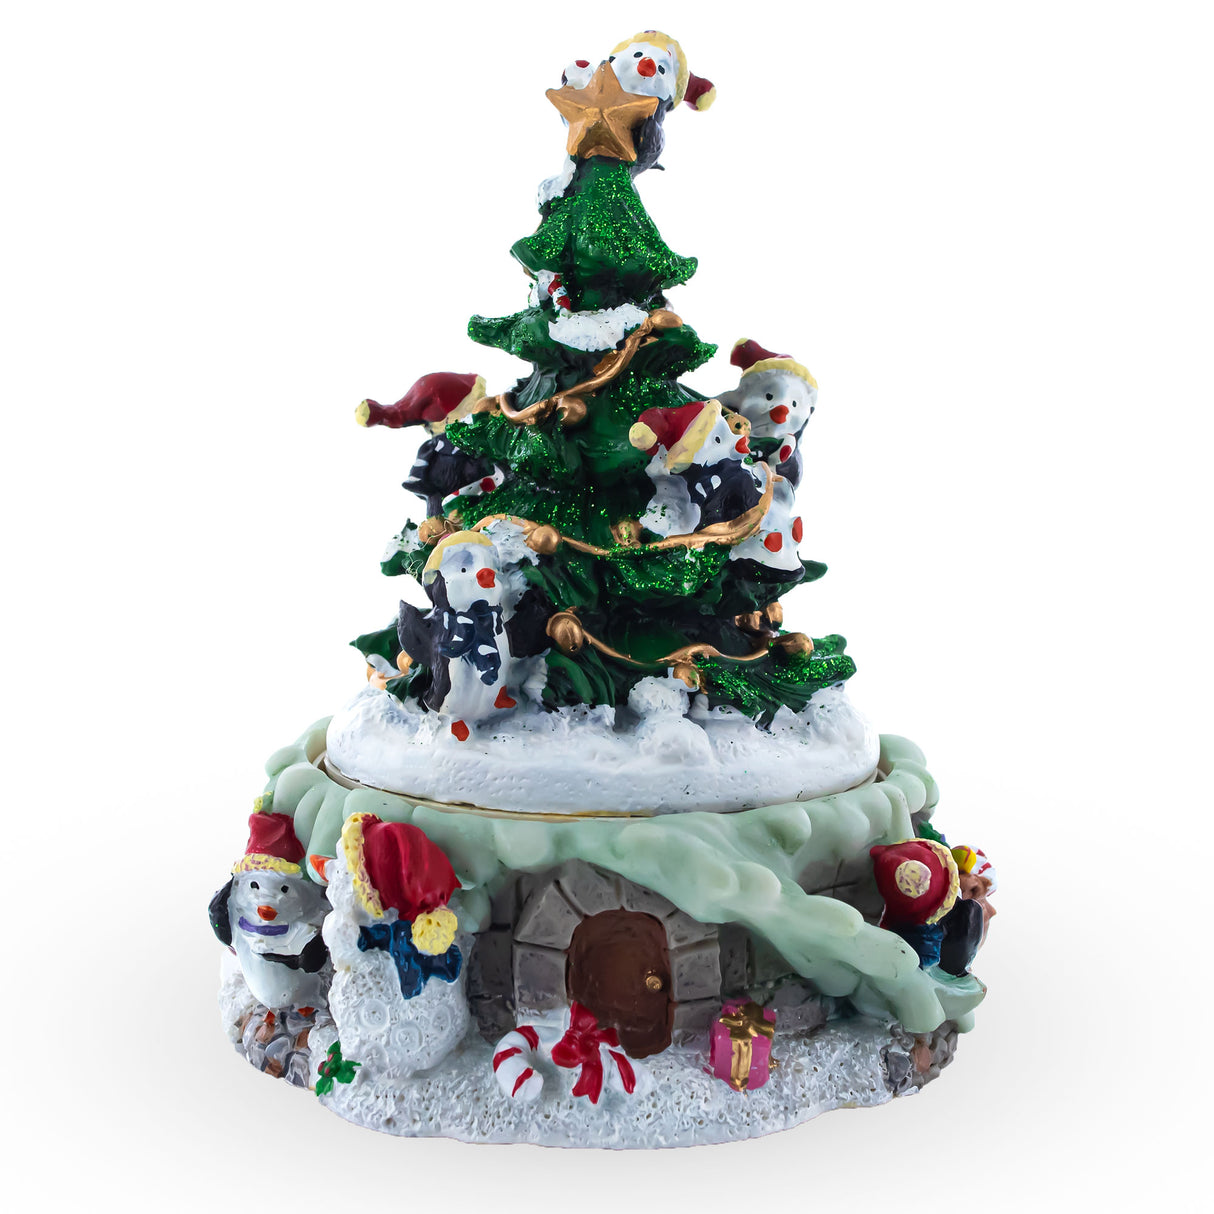 Penguin Festivity: Spinning Christmas Tree Musical Figurine with Decorating Penguins in Multi color, Triangle shape